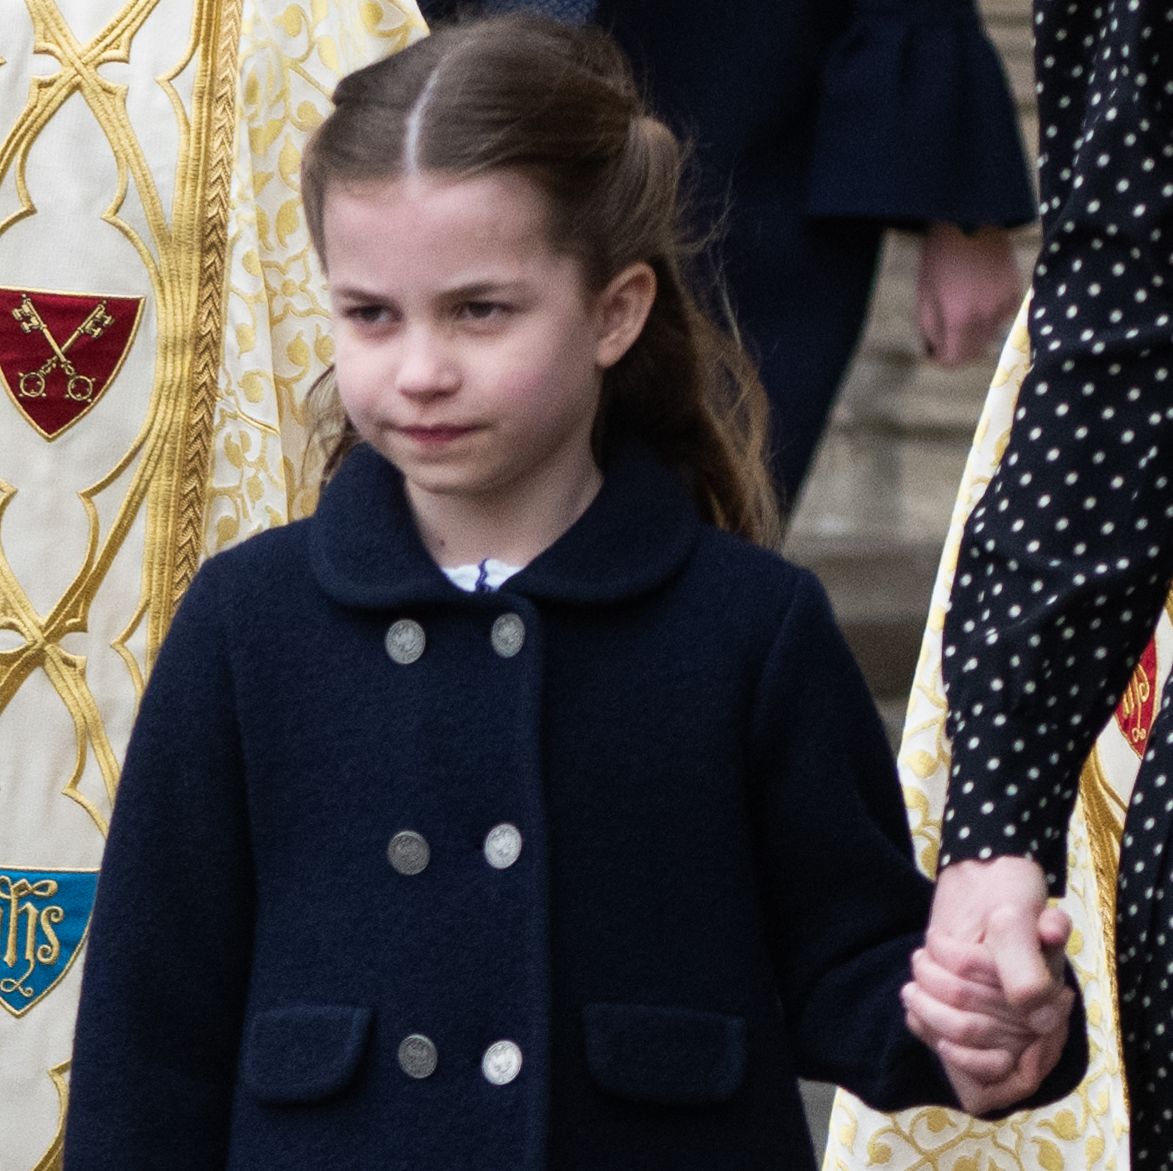 The little royal marked her big day with a series of unseen photographs.